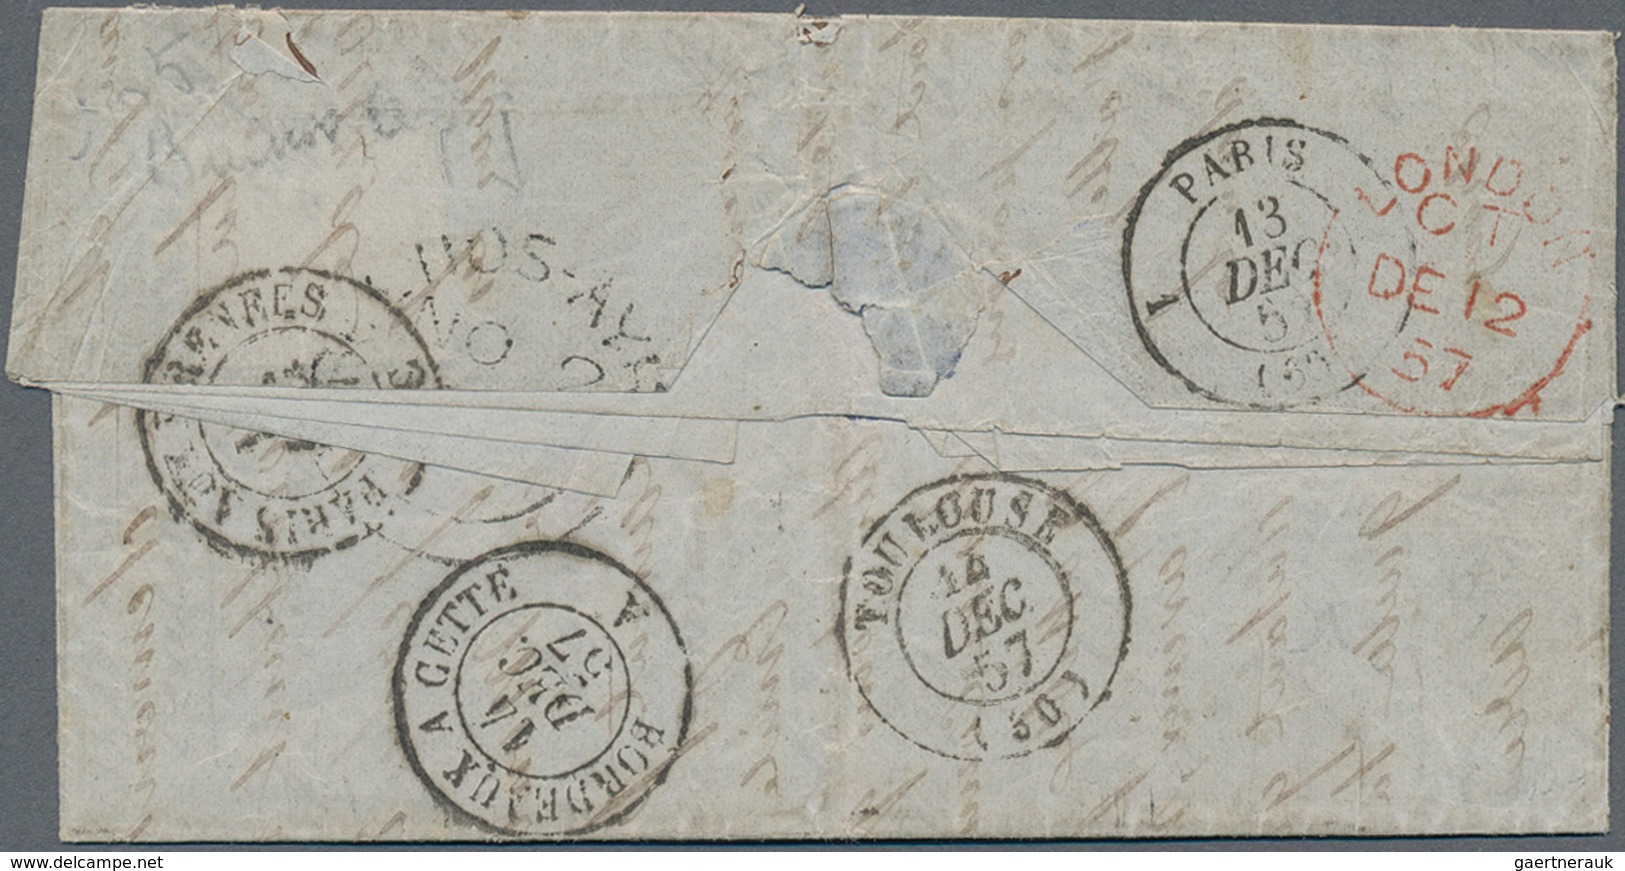 Argentinien - Vorphilatelie: 1857, Entire Folded Small Letter With Boxed "GB 1 F. 60 C." Endorsed "P - Prephilately